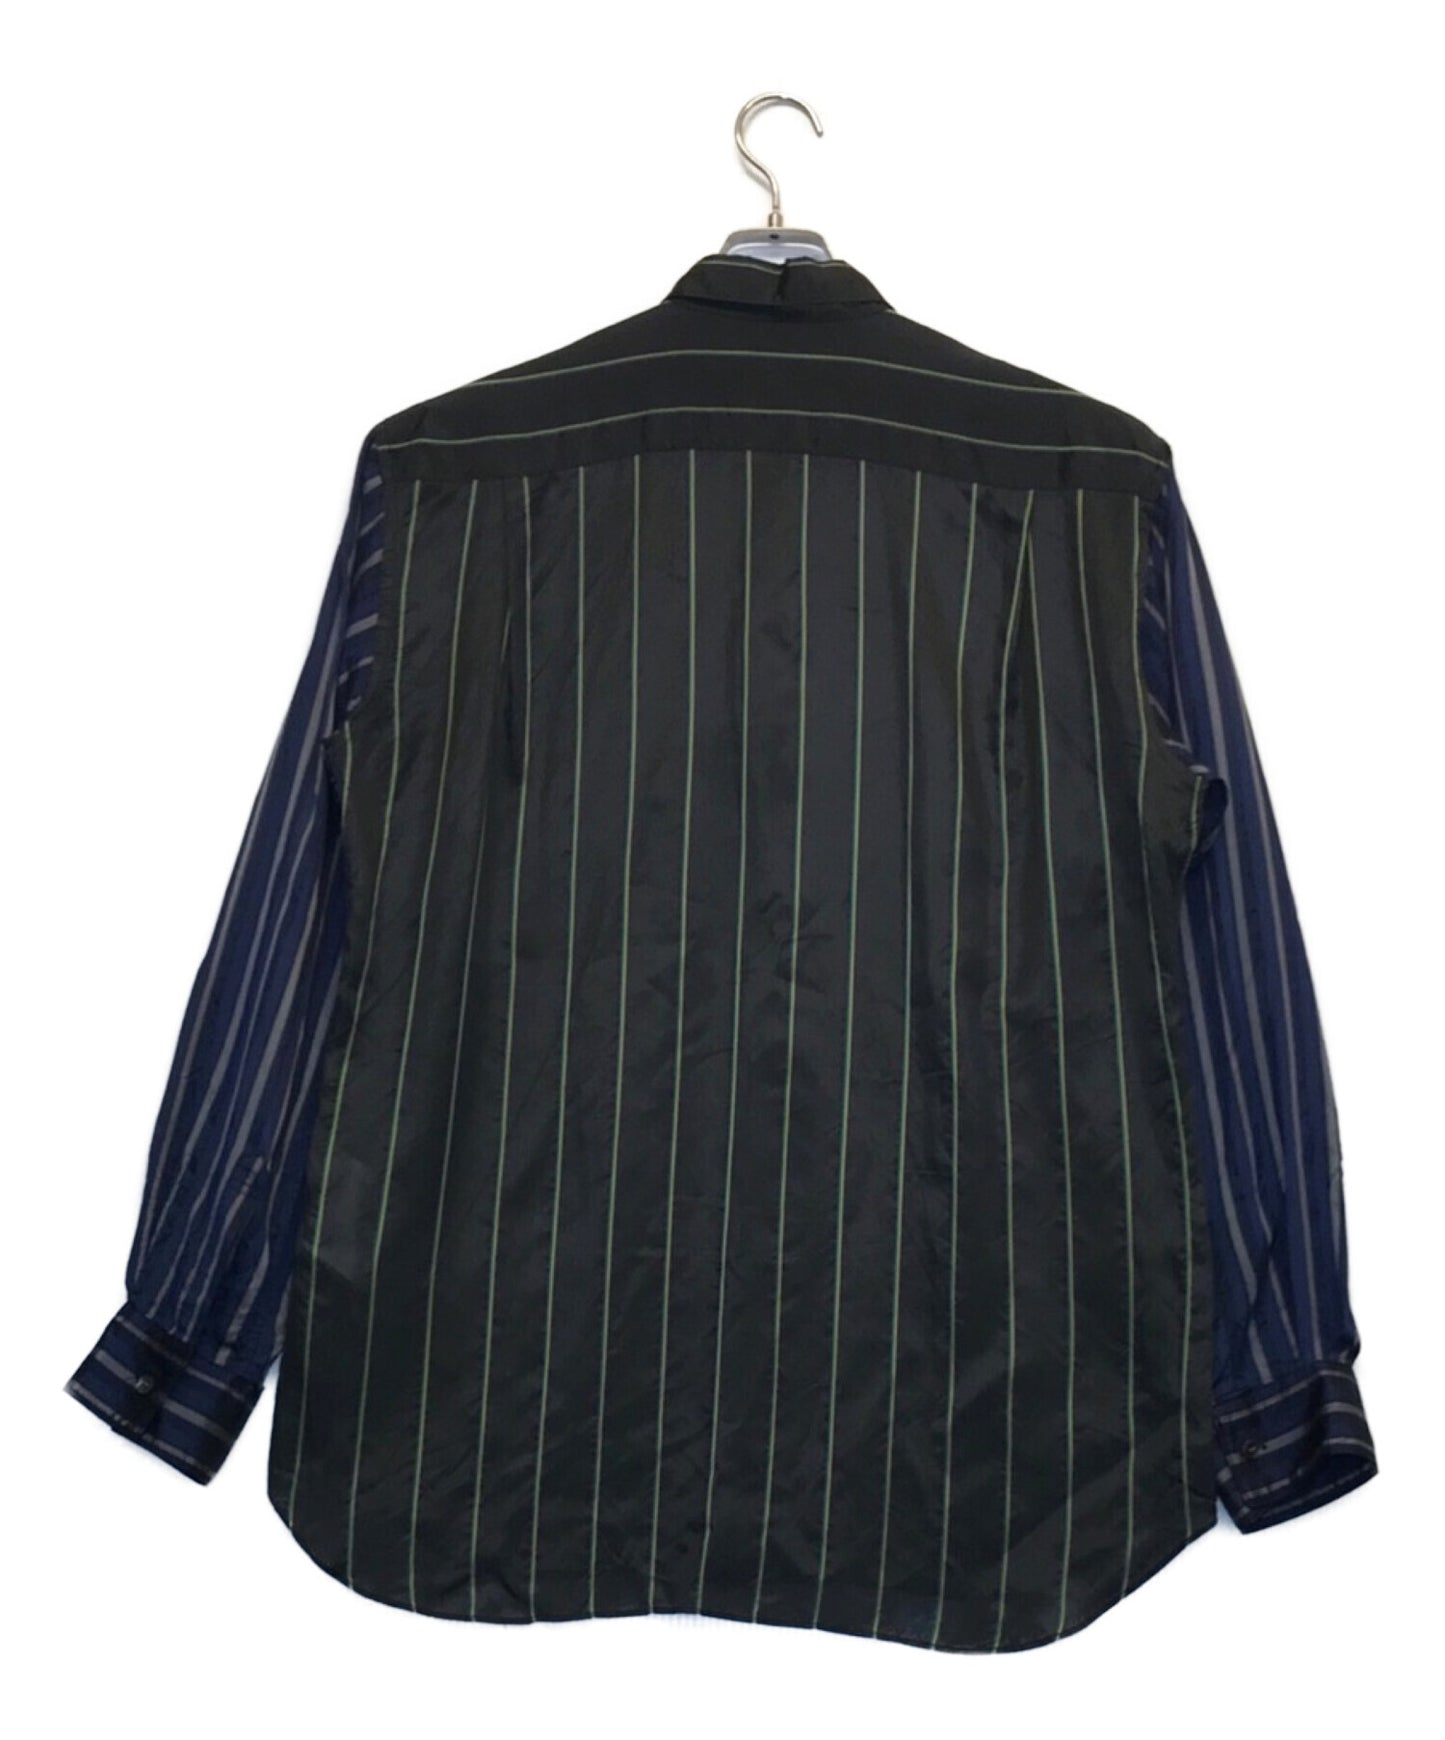 COMME des GARCONS SHIRT Striped Switched Shirt Striped Shirt Long Sleeve Shirt Shirt S27065